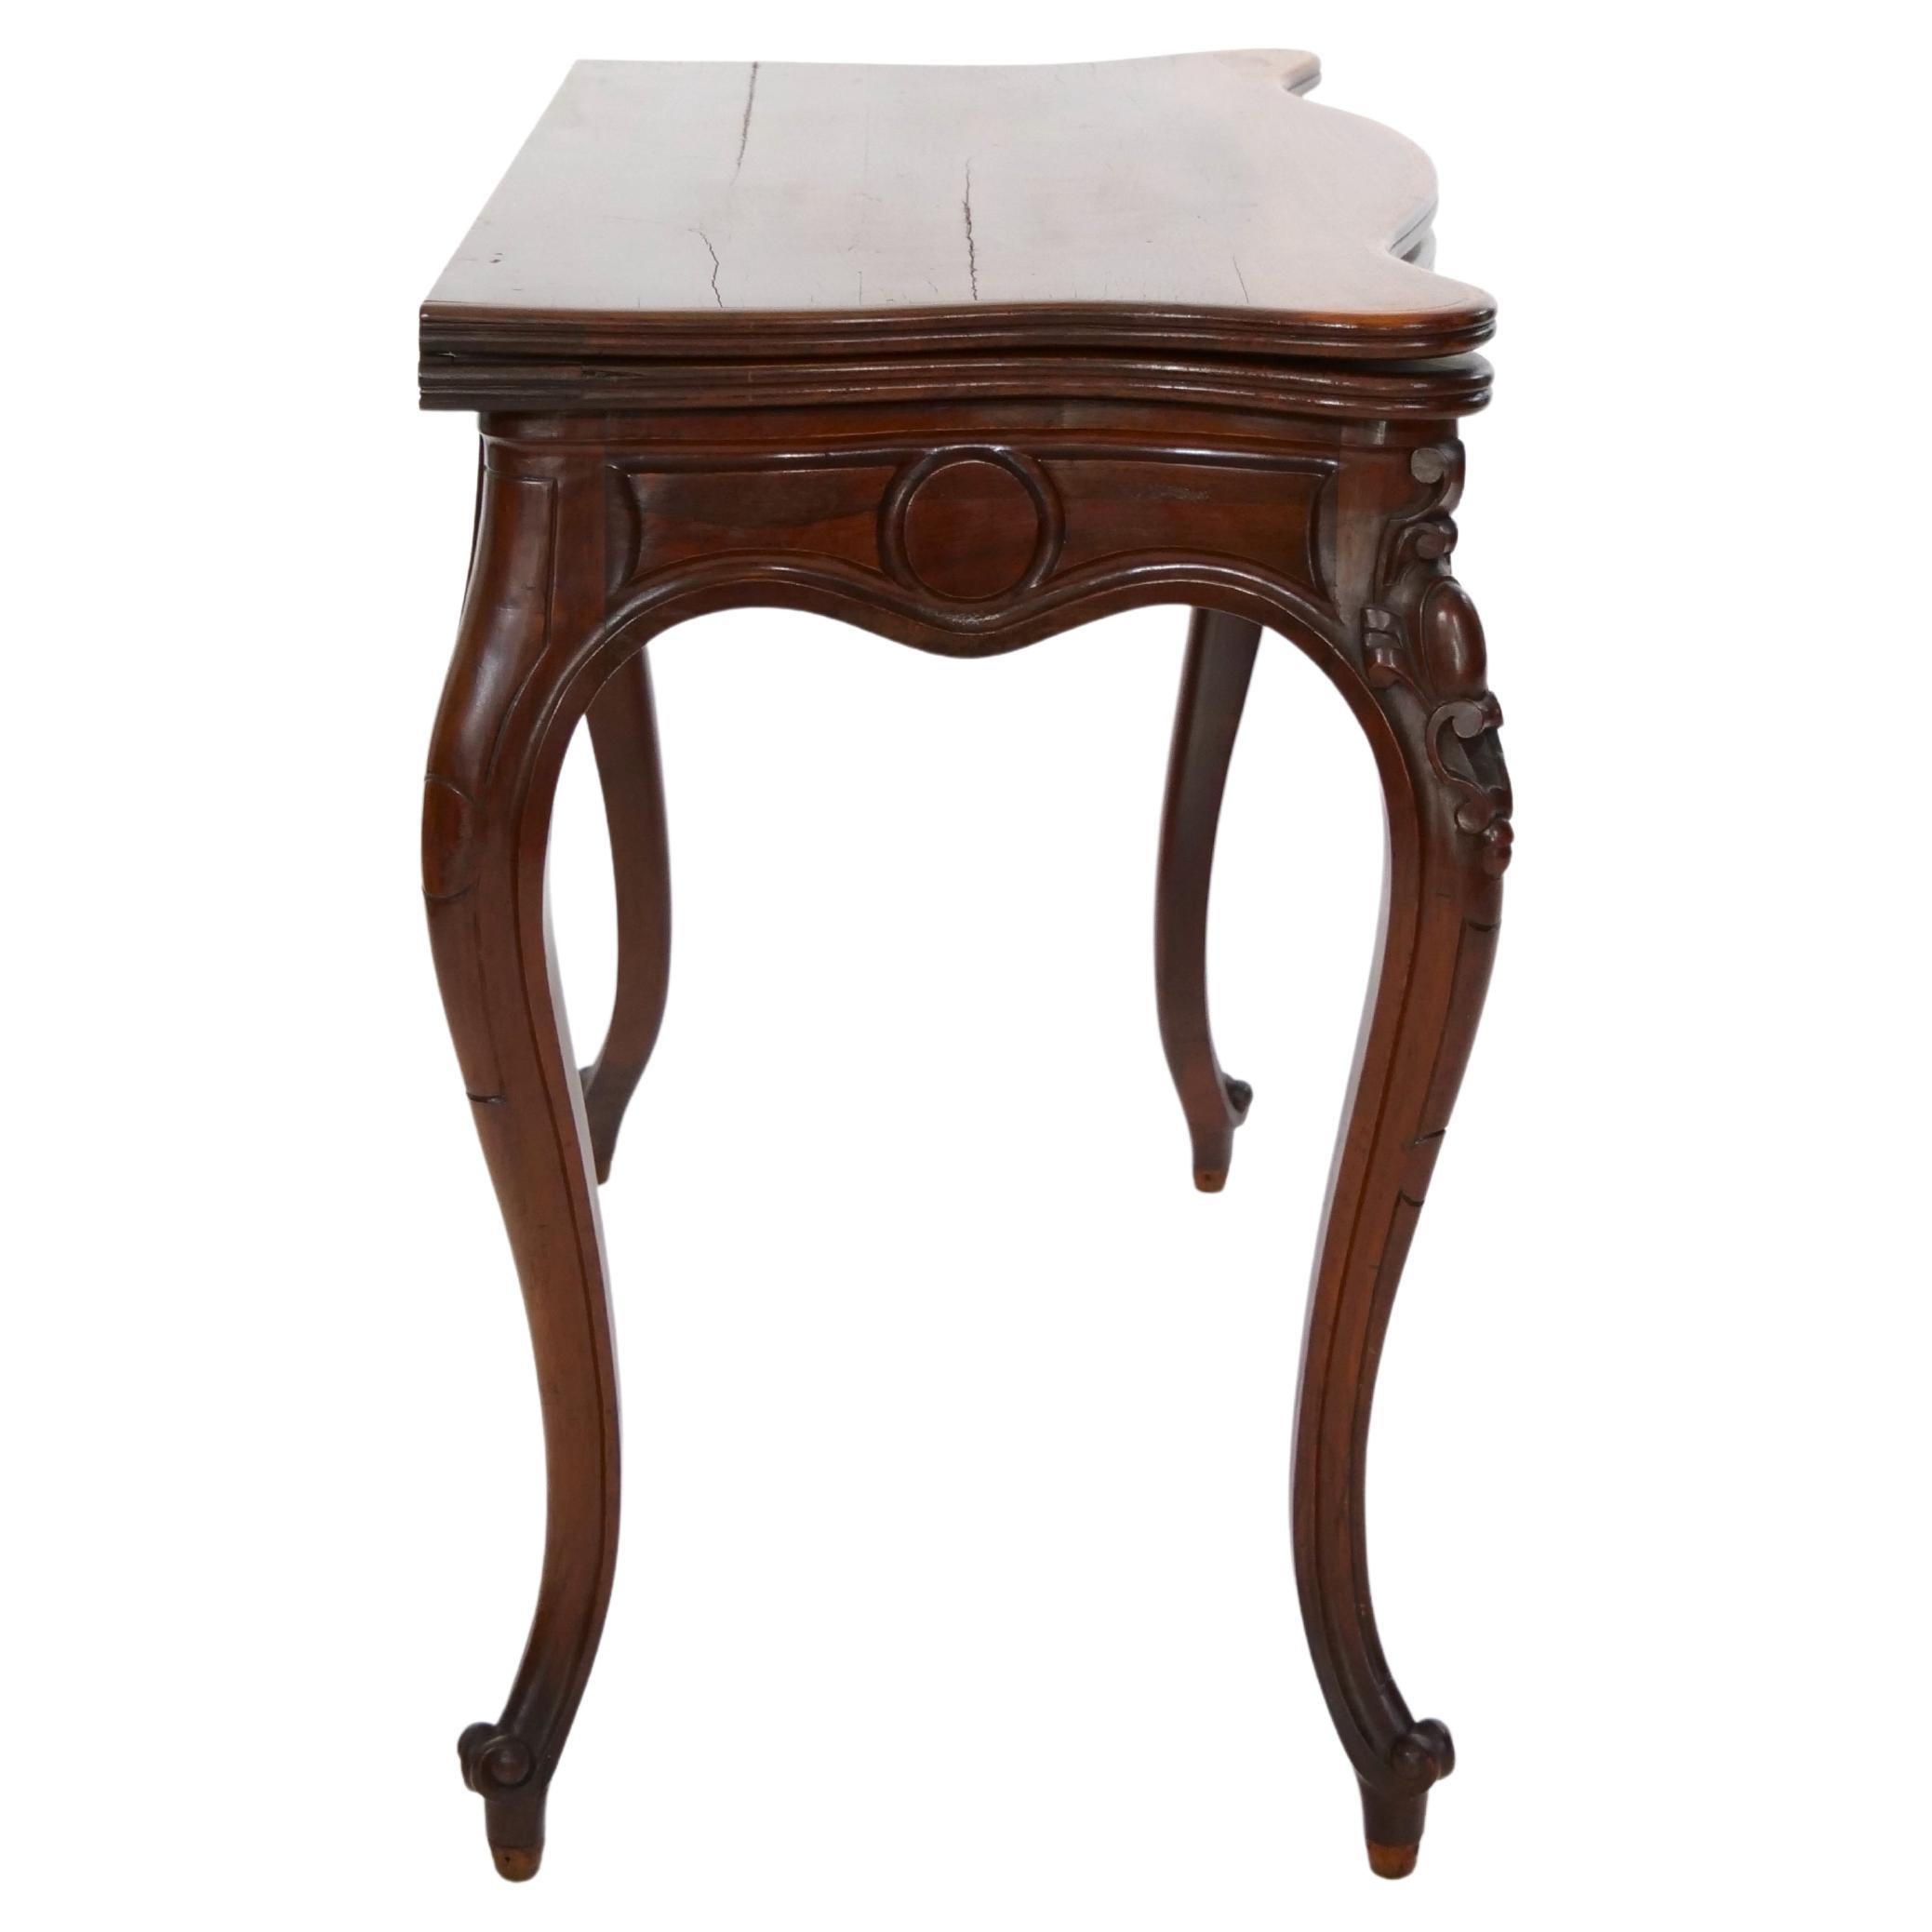 Early 19th Century mahogany wood beautifully proportioned console or game table with a flip top leather details when open resting on a slightly curved cabriole legs. The table is in good antique condition.  Appropriate wear consistent with age /